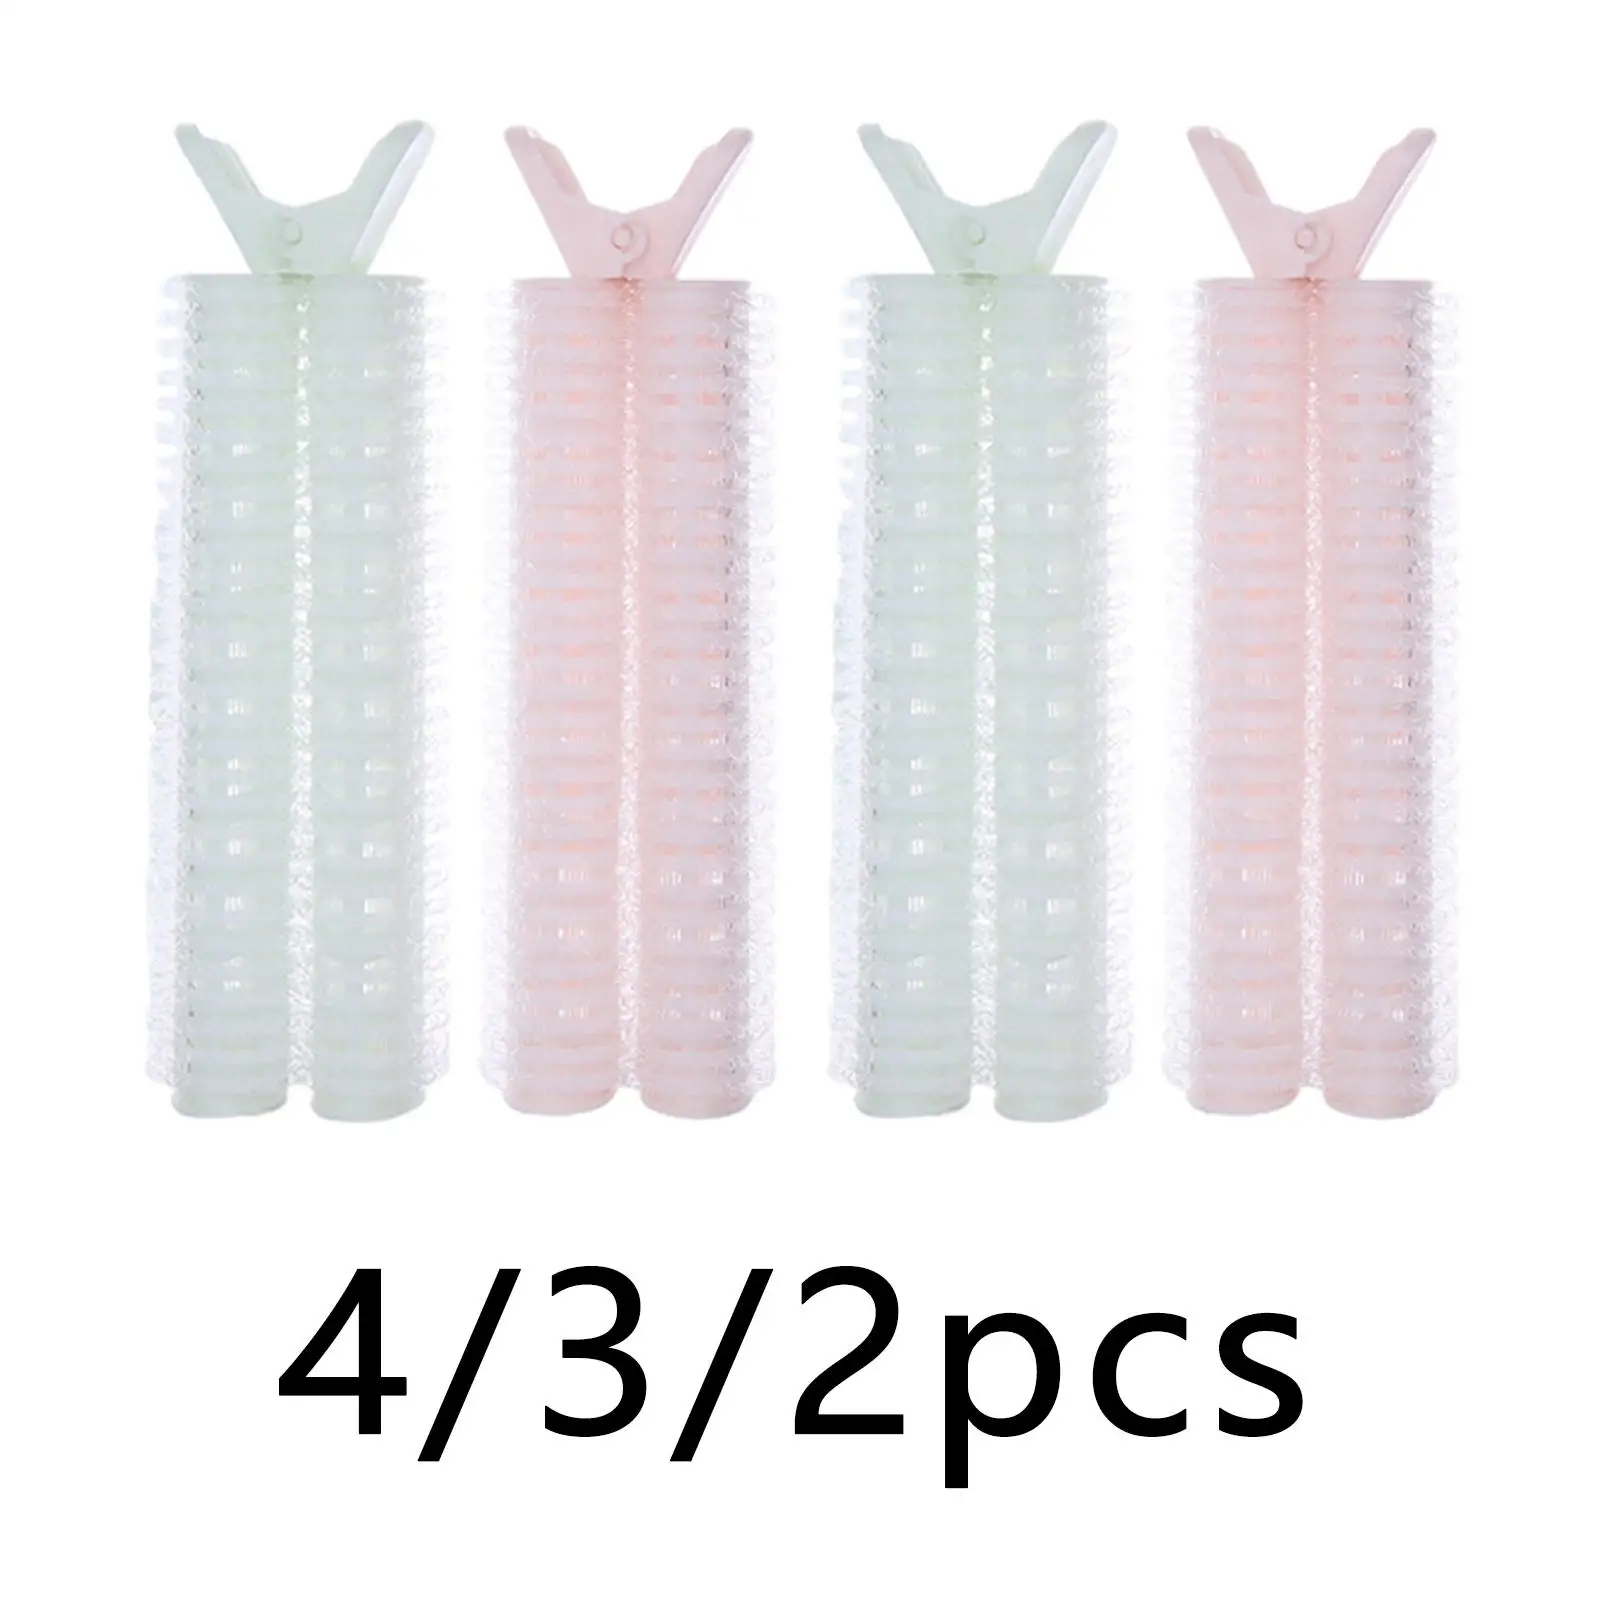 Volumizing Hair Clips Plastic Nylon Natural Hair Curlers Bangs Barrettes Styling Tool for Hair Styling Office Hotel Travel DIY